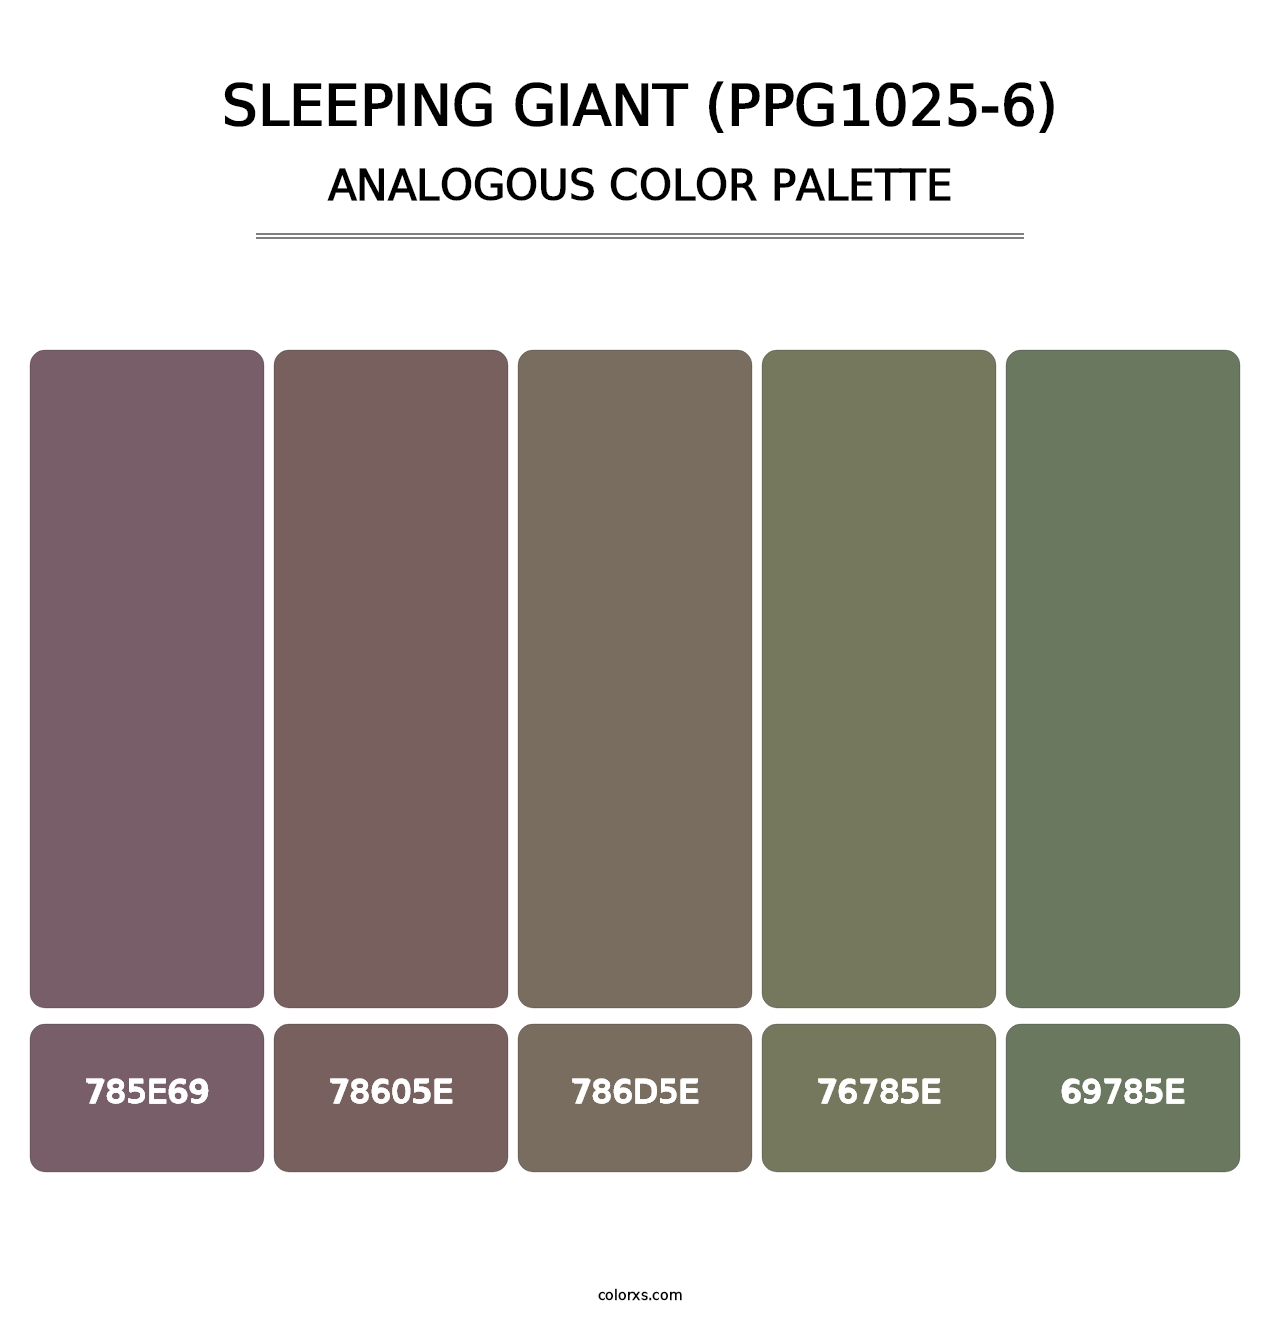 Sleeping Giant (PPG1025-6) - Analogous Color Palette